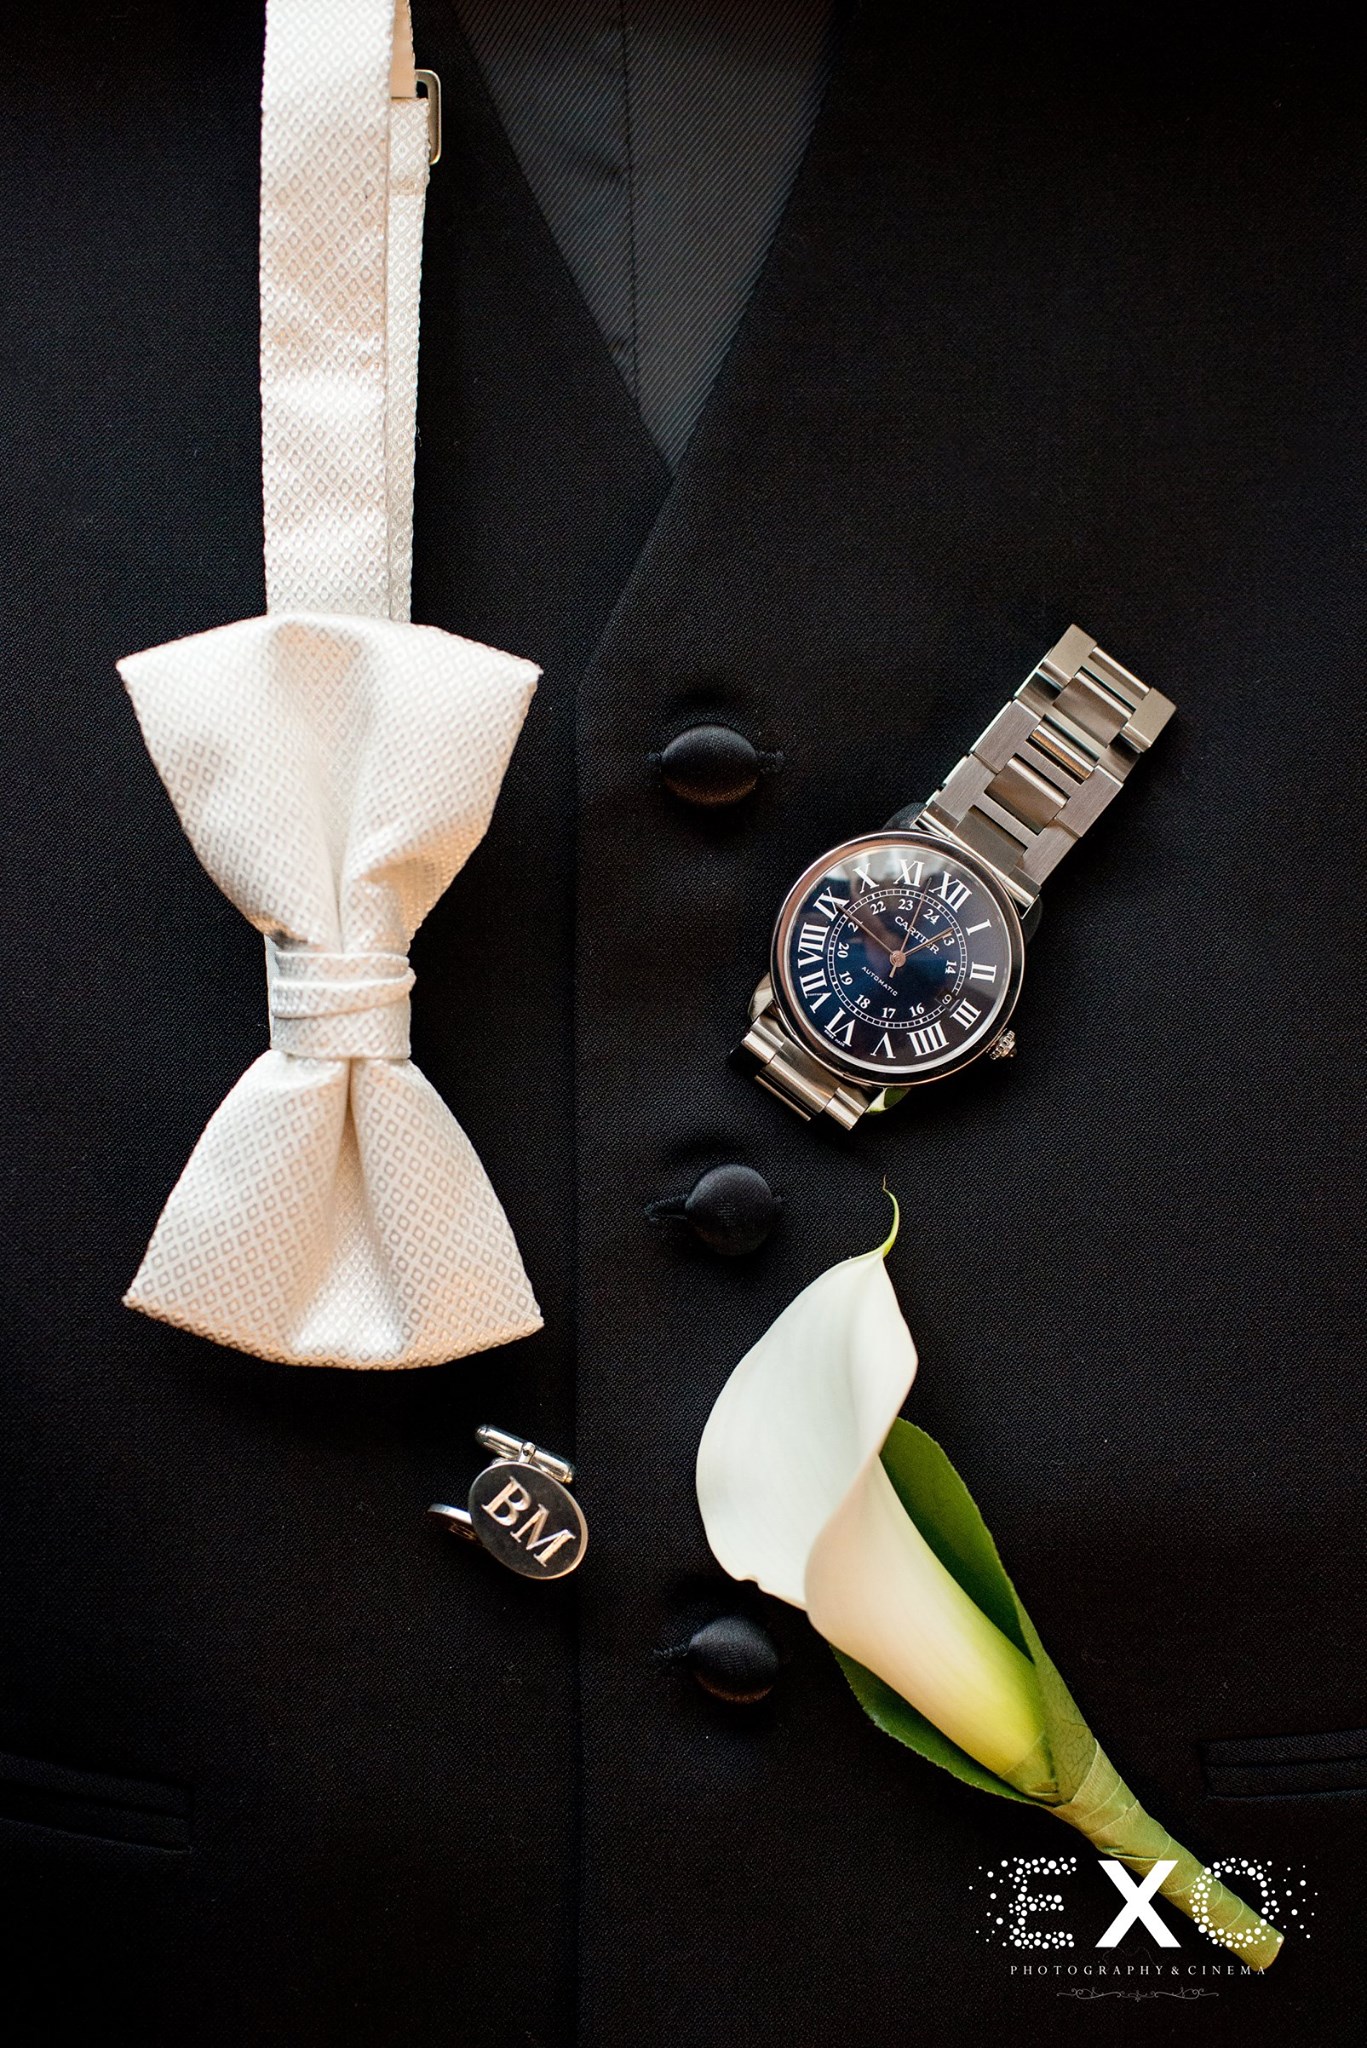 grooms suit details and rentals from Foresto Tuxedo